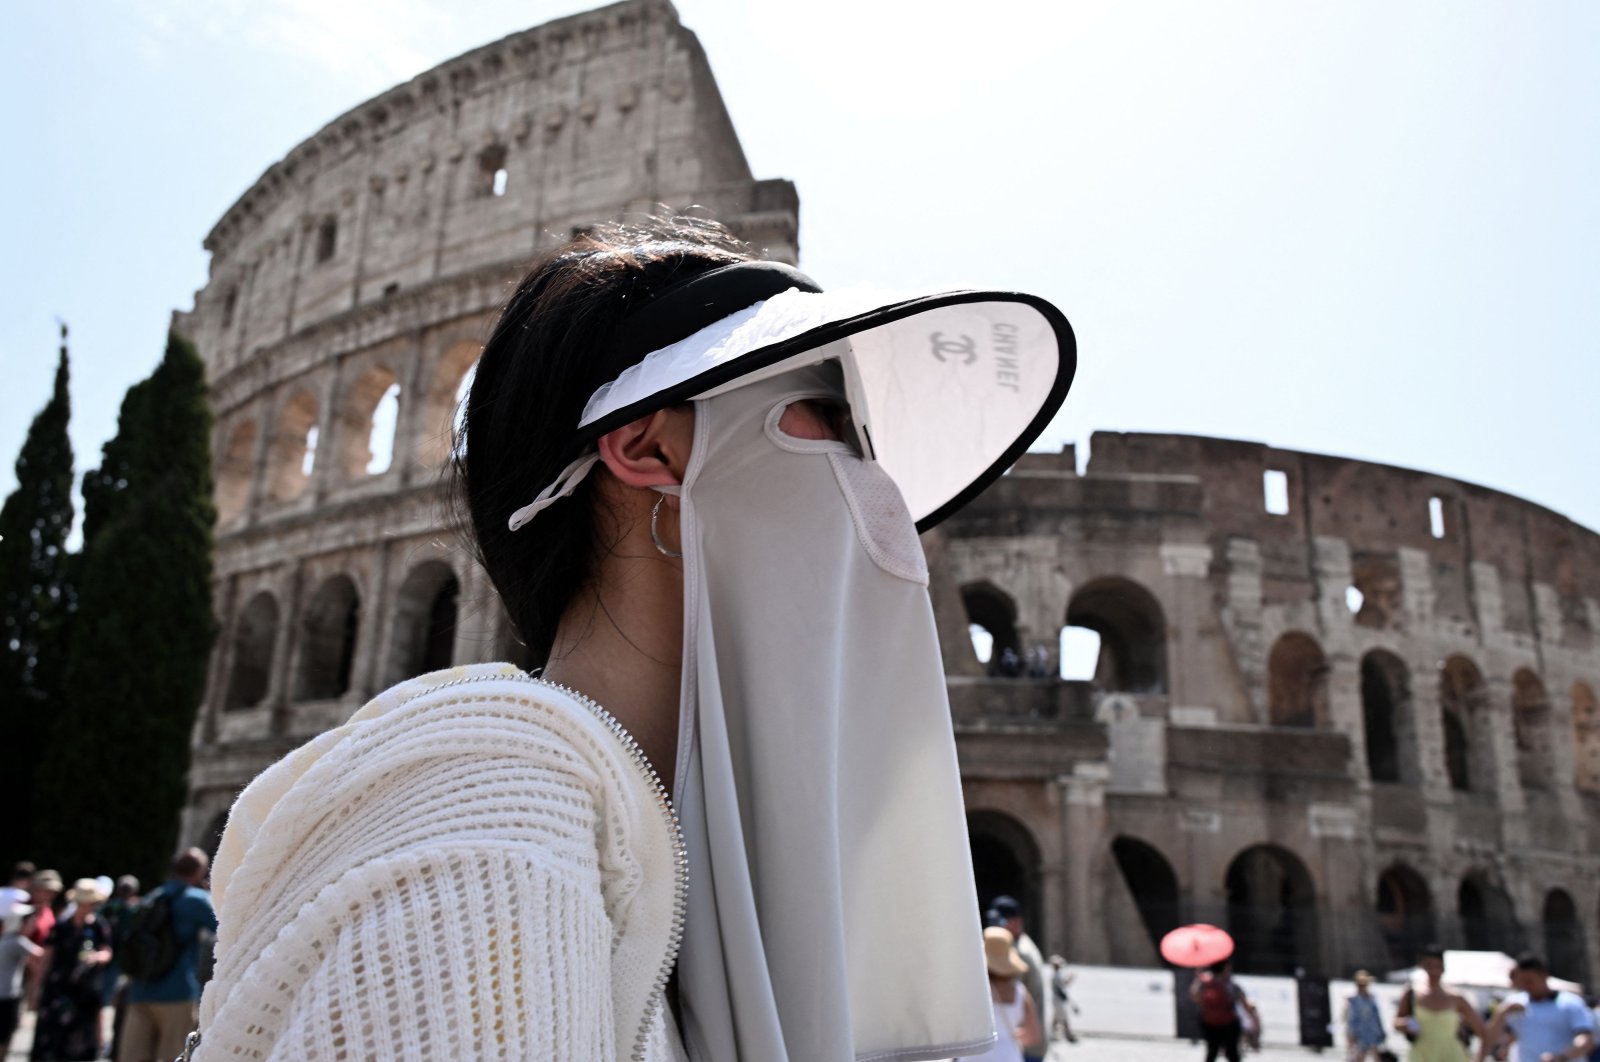 A tourist shelters from the sun with a sun protection clothing near the Colosseum in Rome, Italy, July 24, 2023. (AFP Photo)